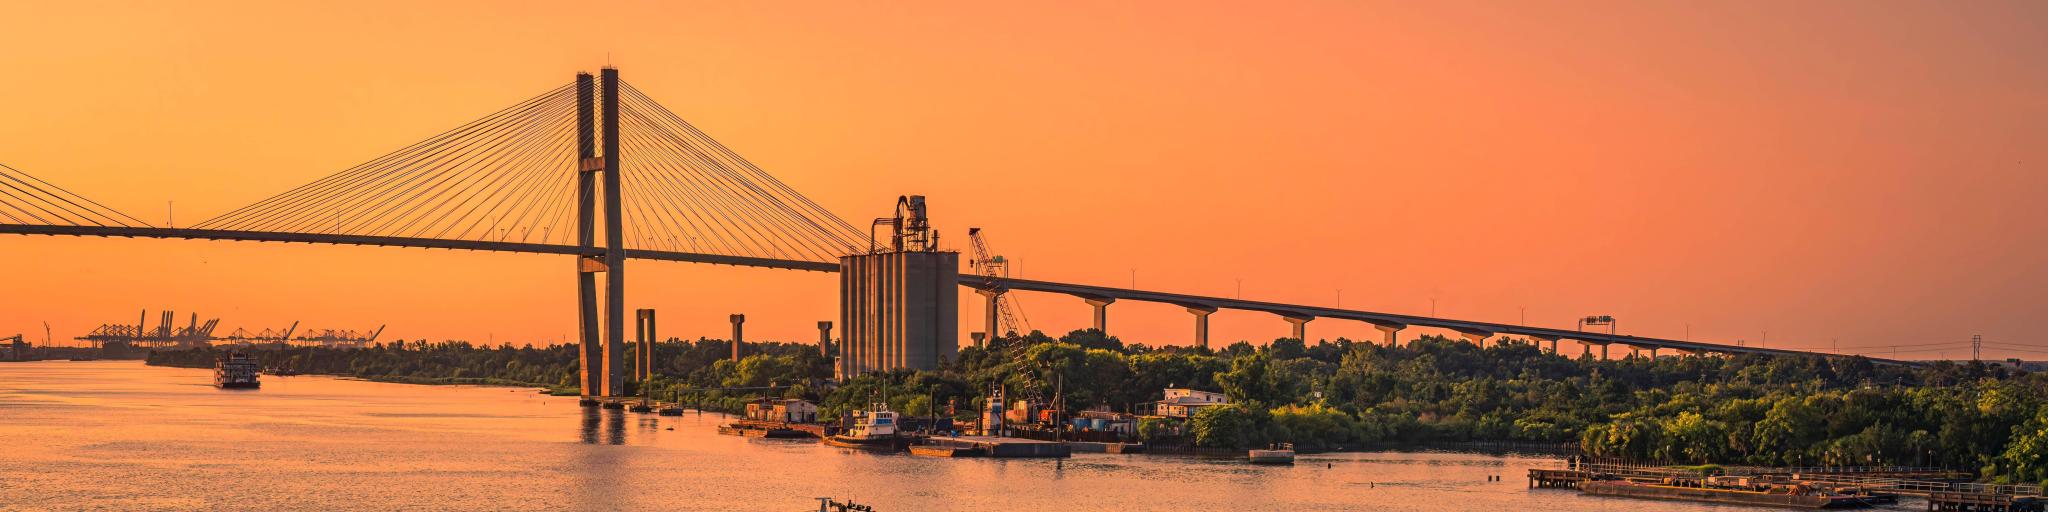 View of Talmadge Memorial Bridge and a tug boat on the river during sunset